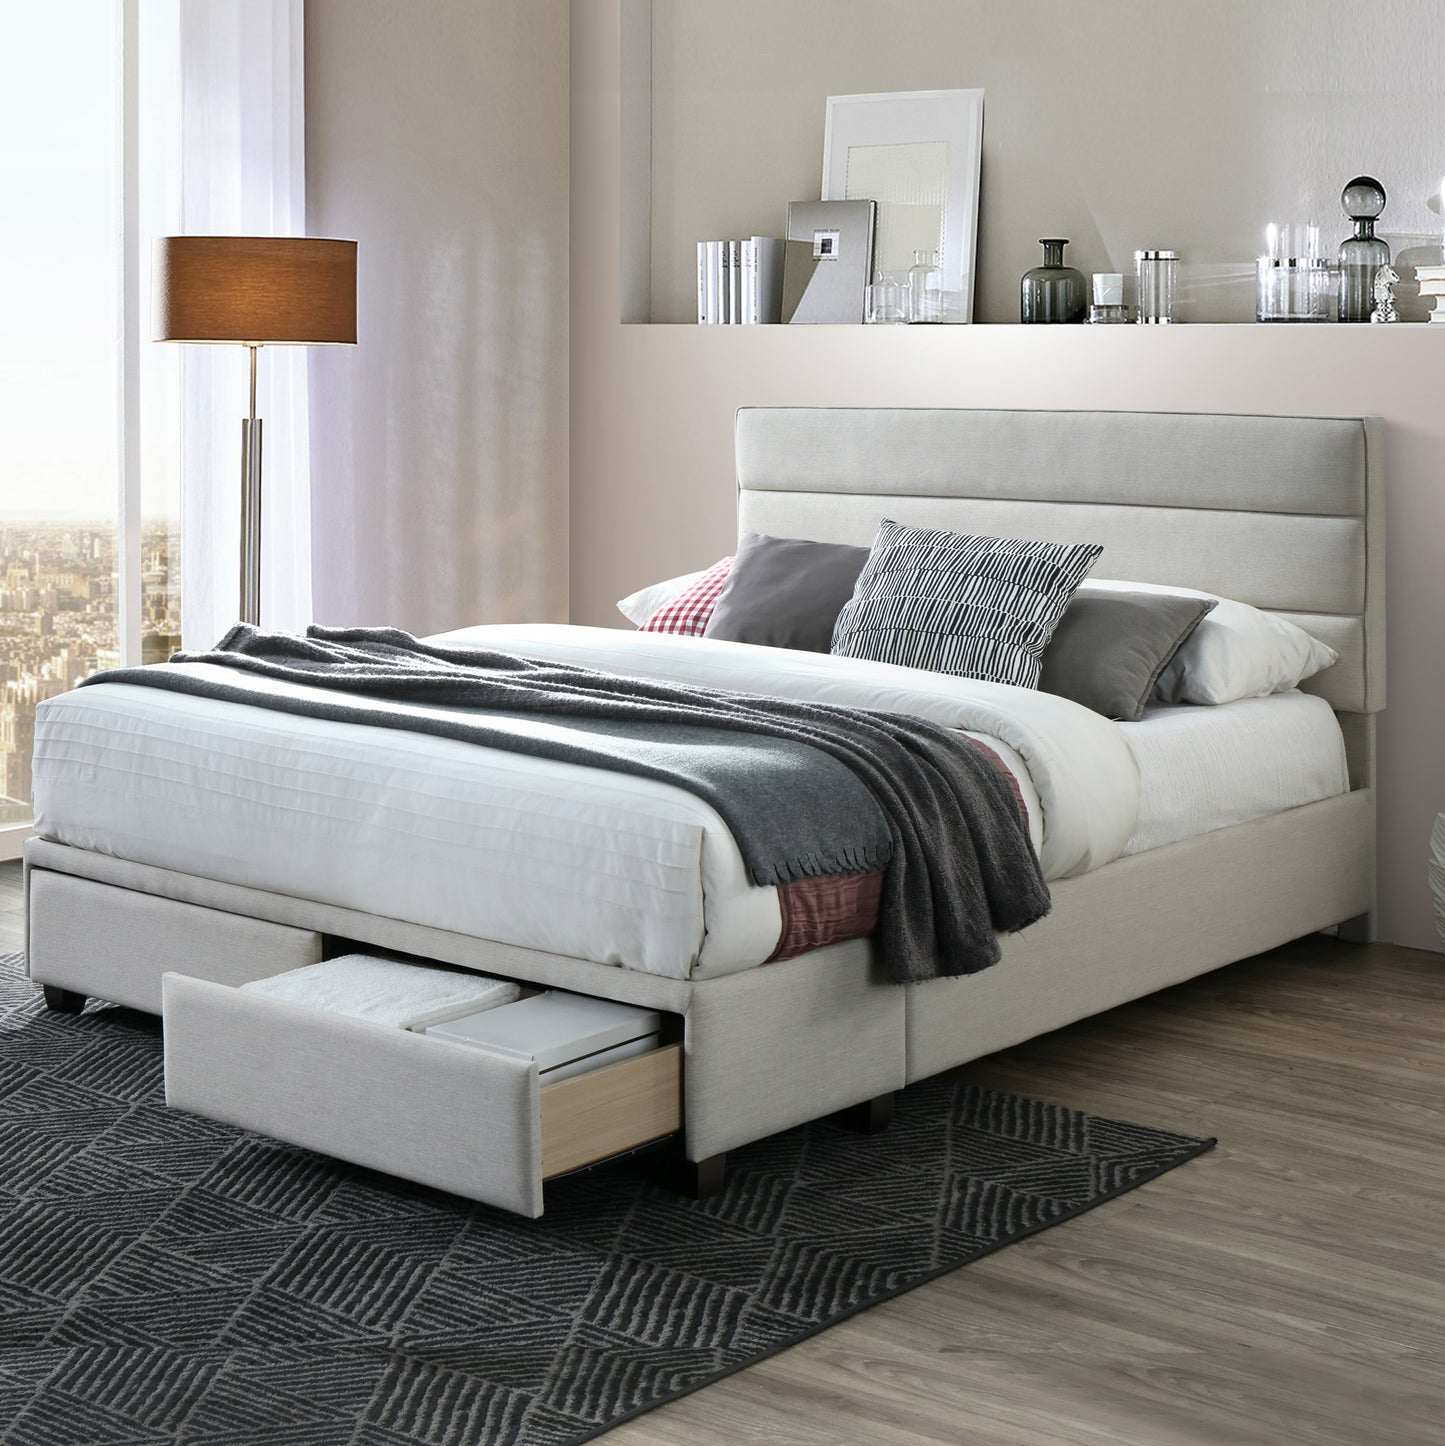 Arnia Beige Fabric Queen Bed Captain’s Bed with Two Storage Drawers